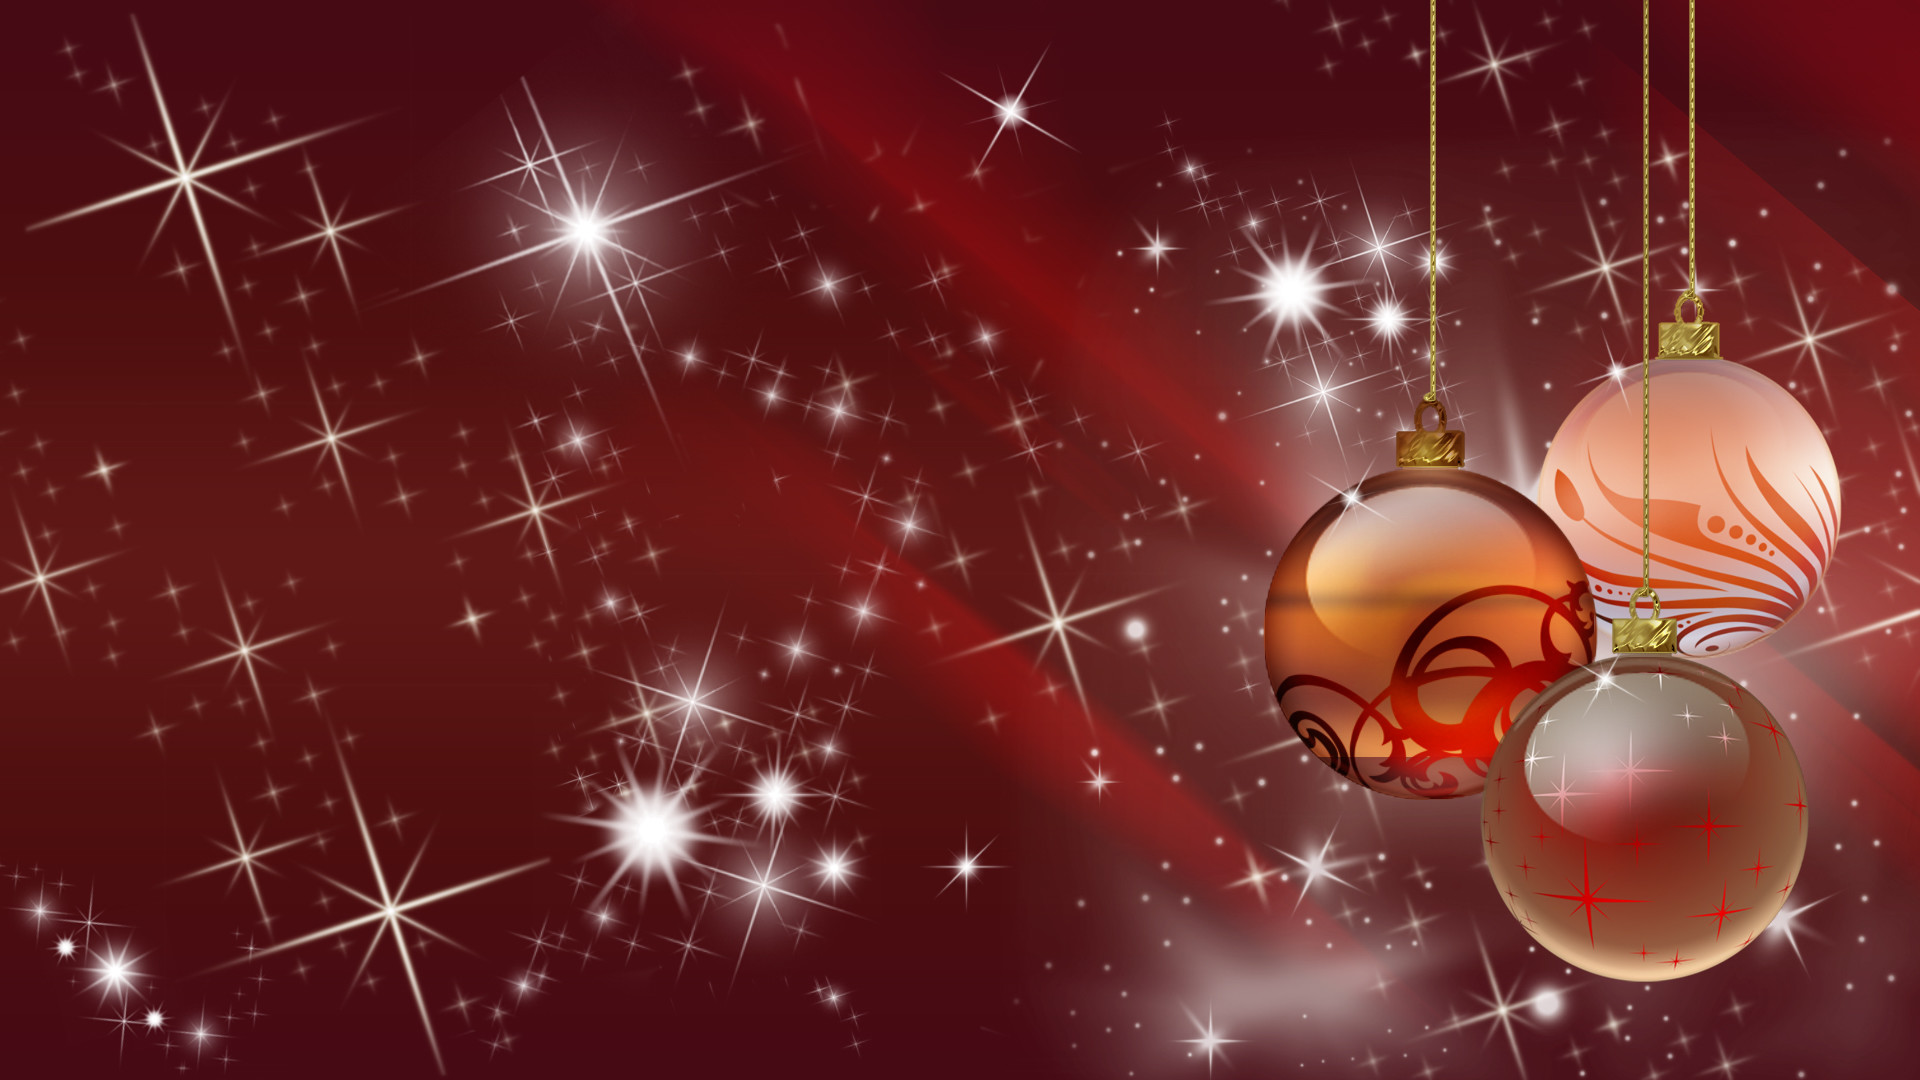 1920x1080 Free Christmas Wallpaper For Phones 18252 HD Wallpapers